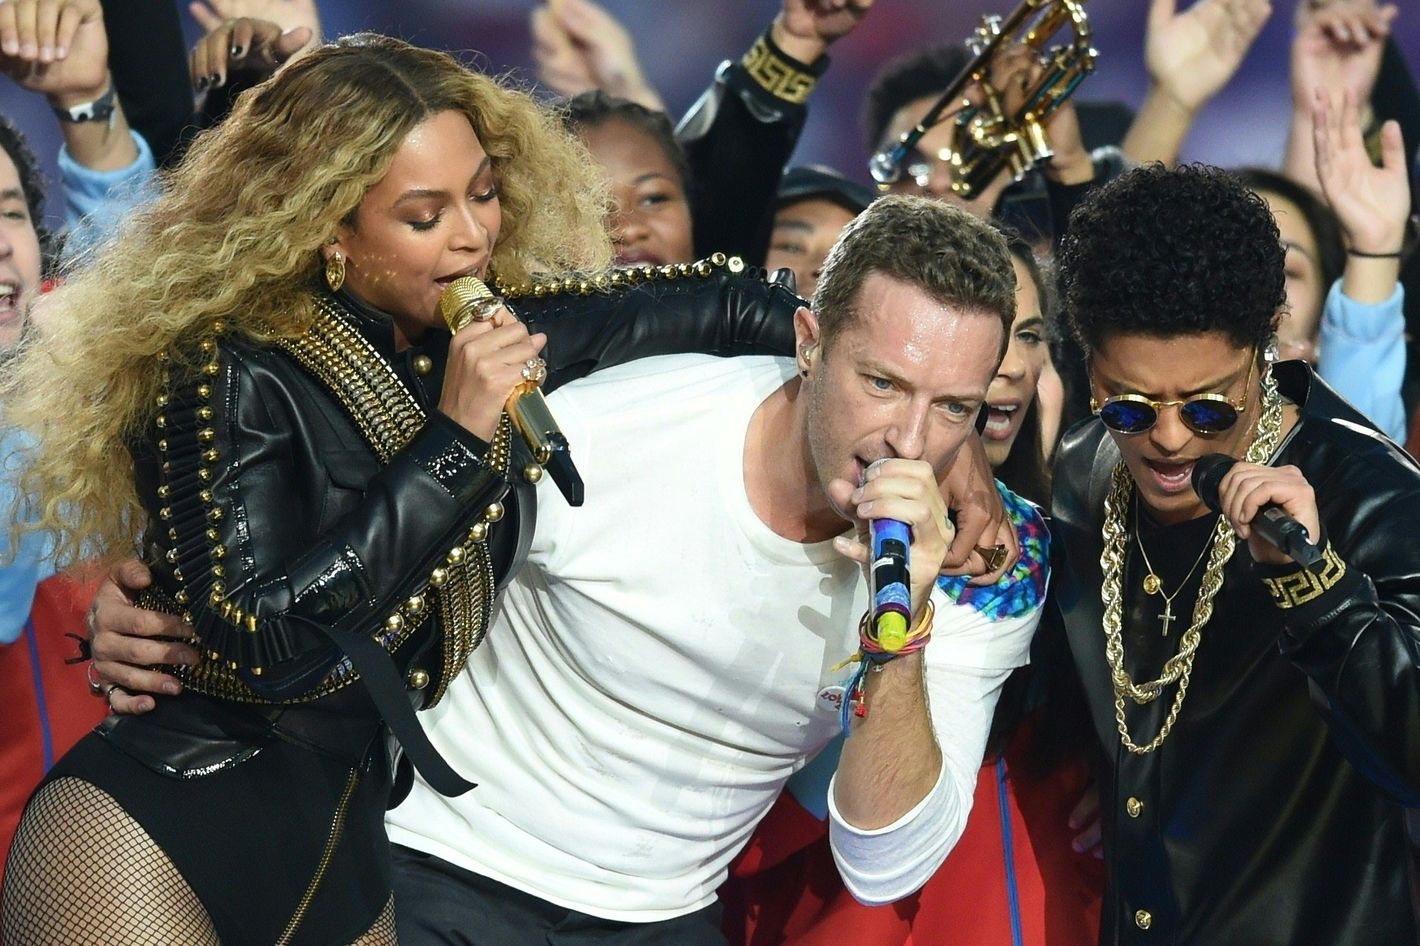 Coldplay Super Bowl half time show with Beyonce & Bruno Mars